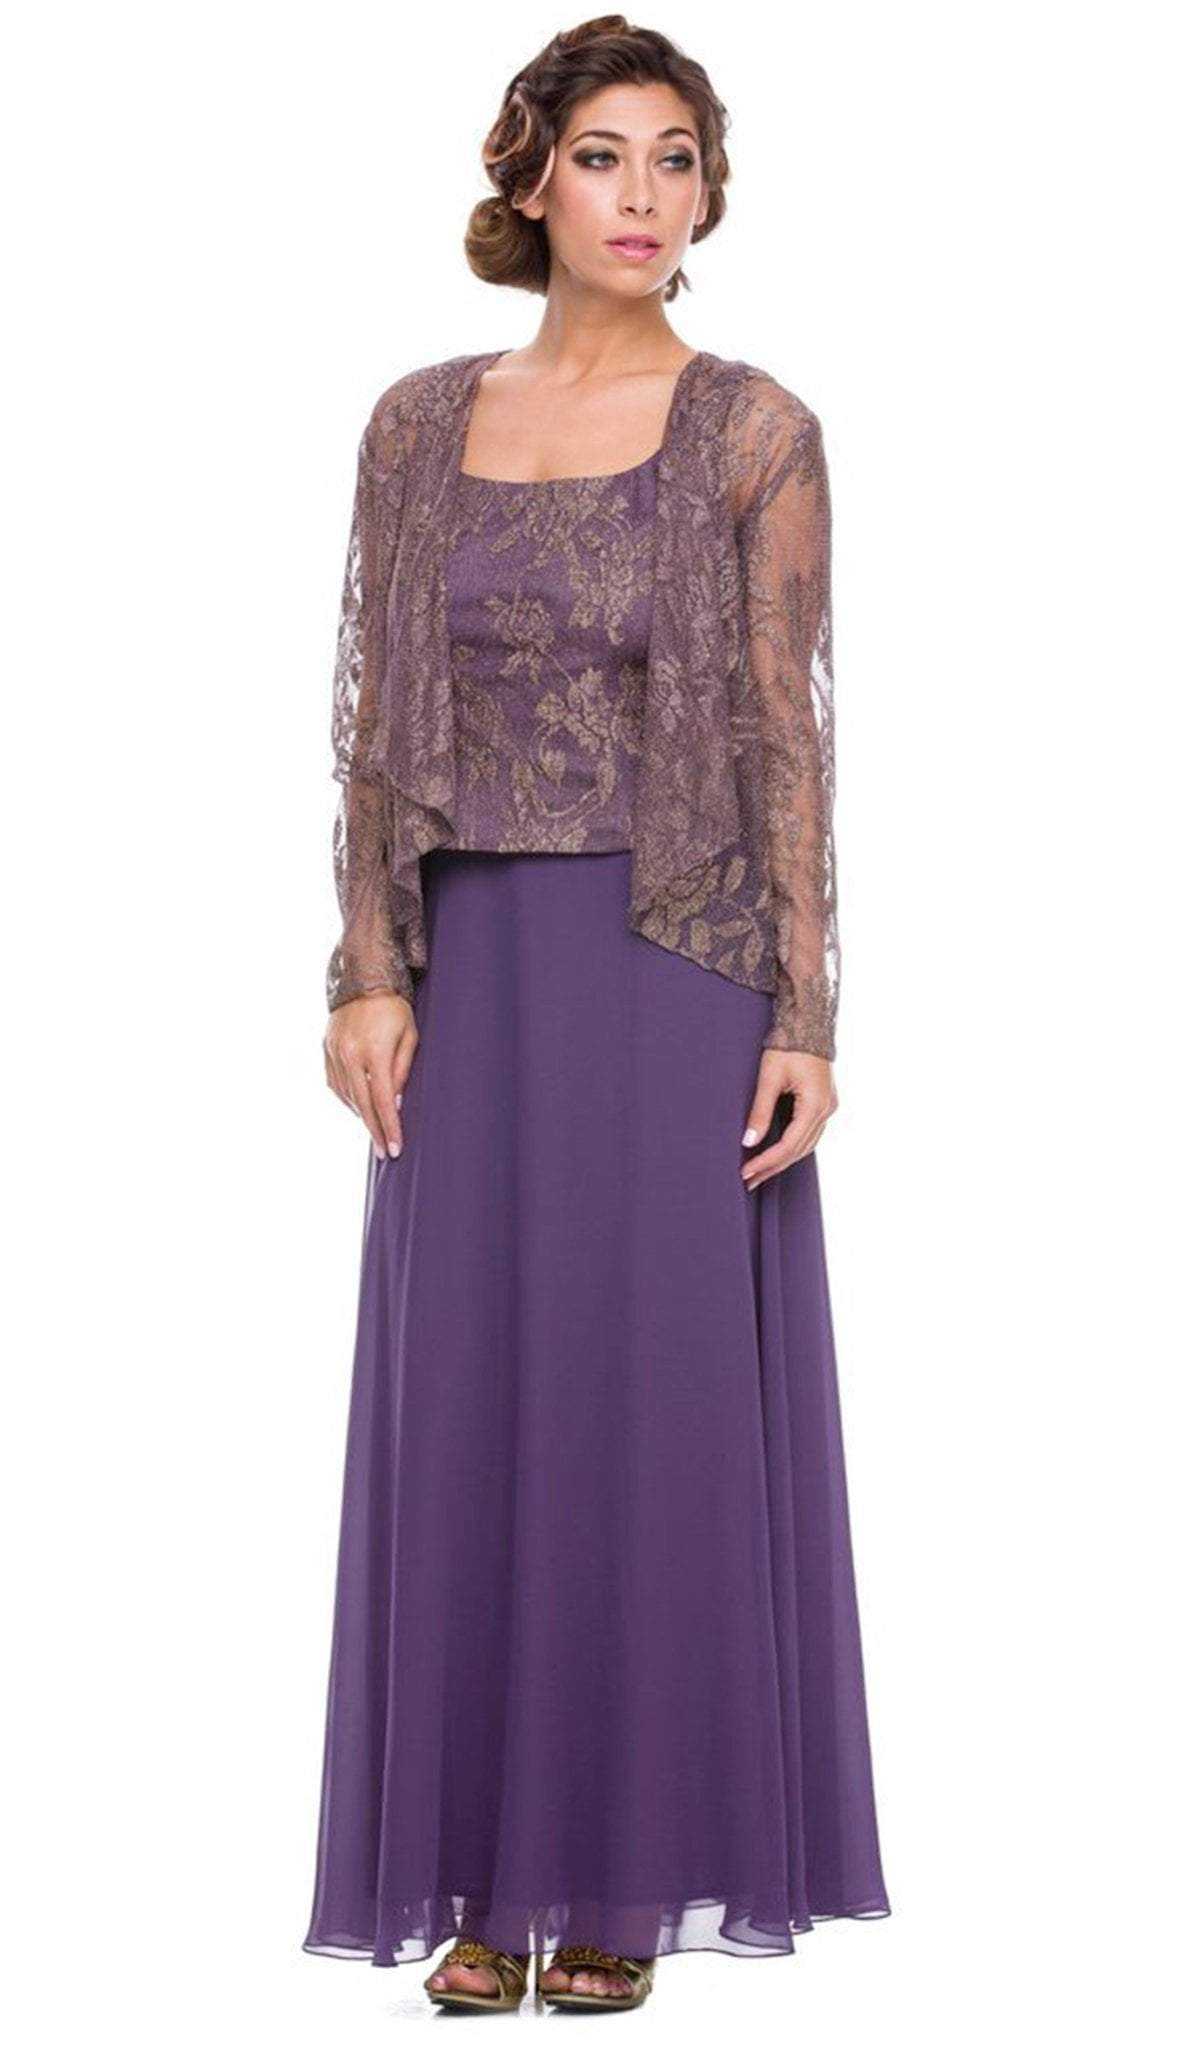 Nox Anabel, Nox Anabel - 5076 Lace Dress with Sheer Jacket